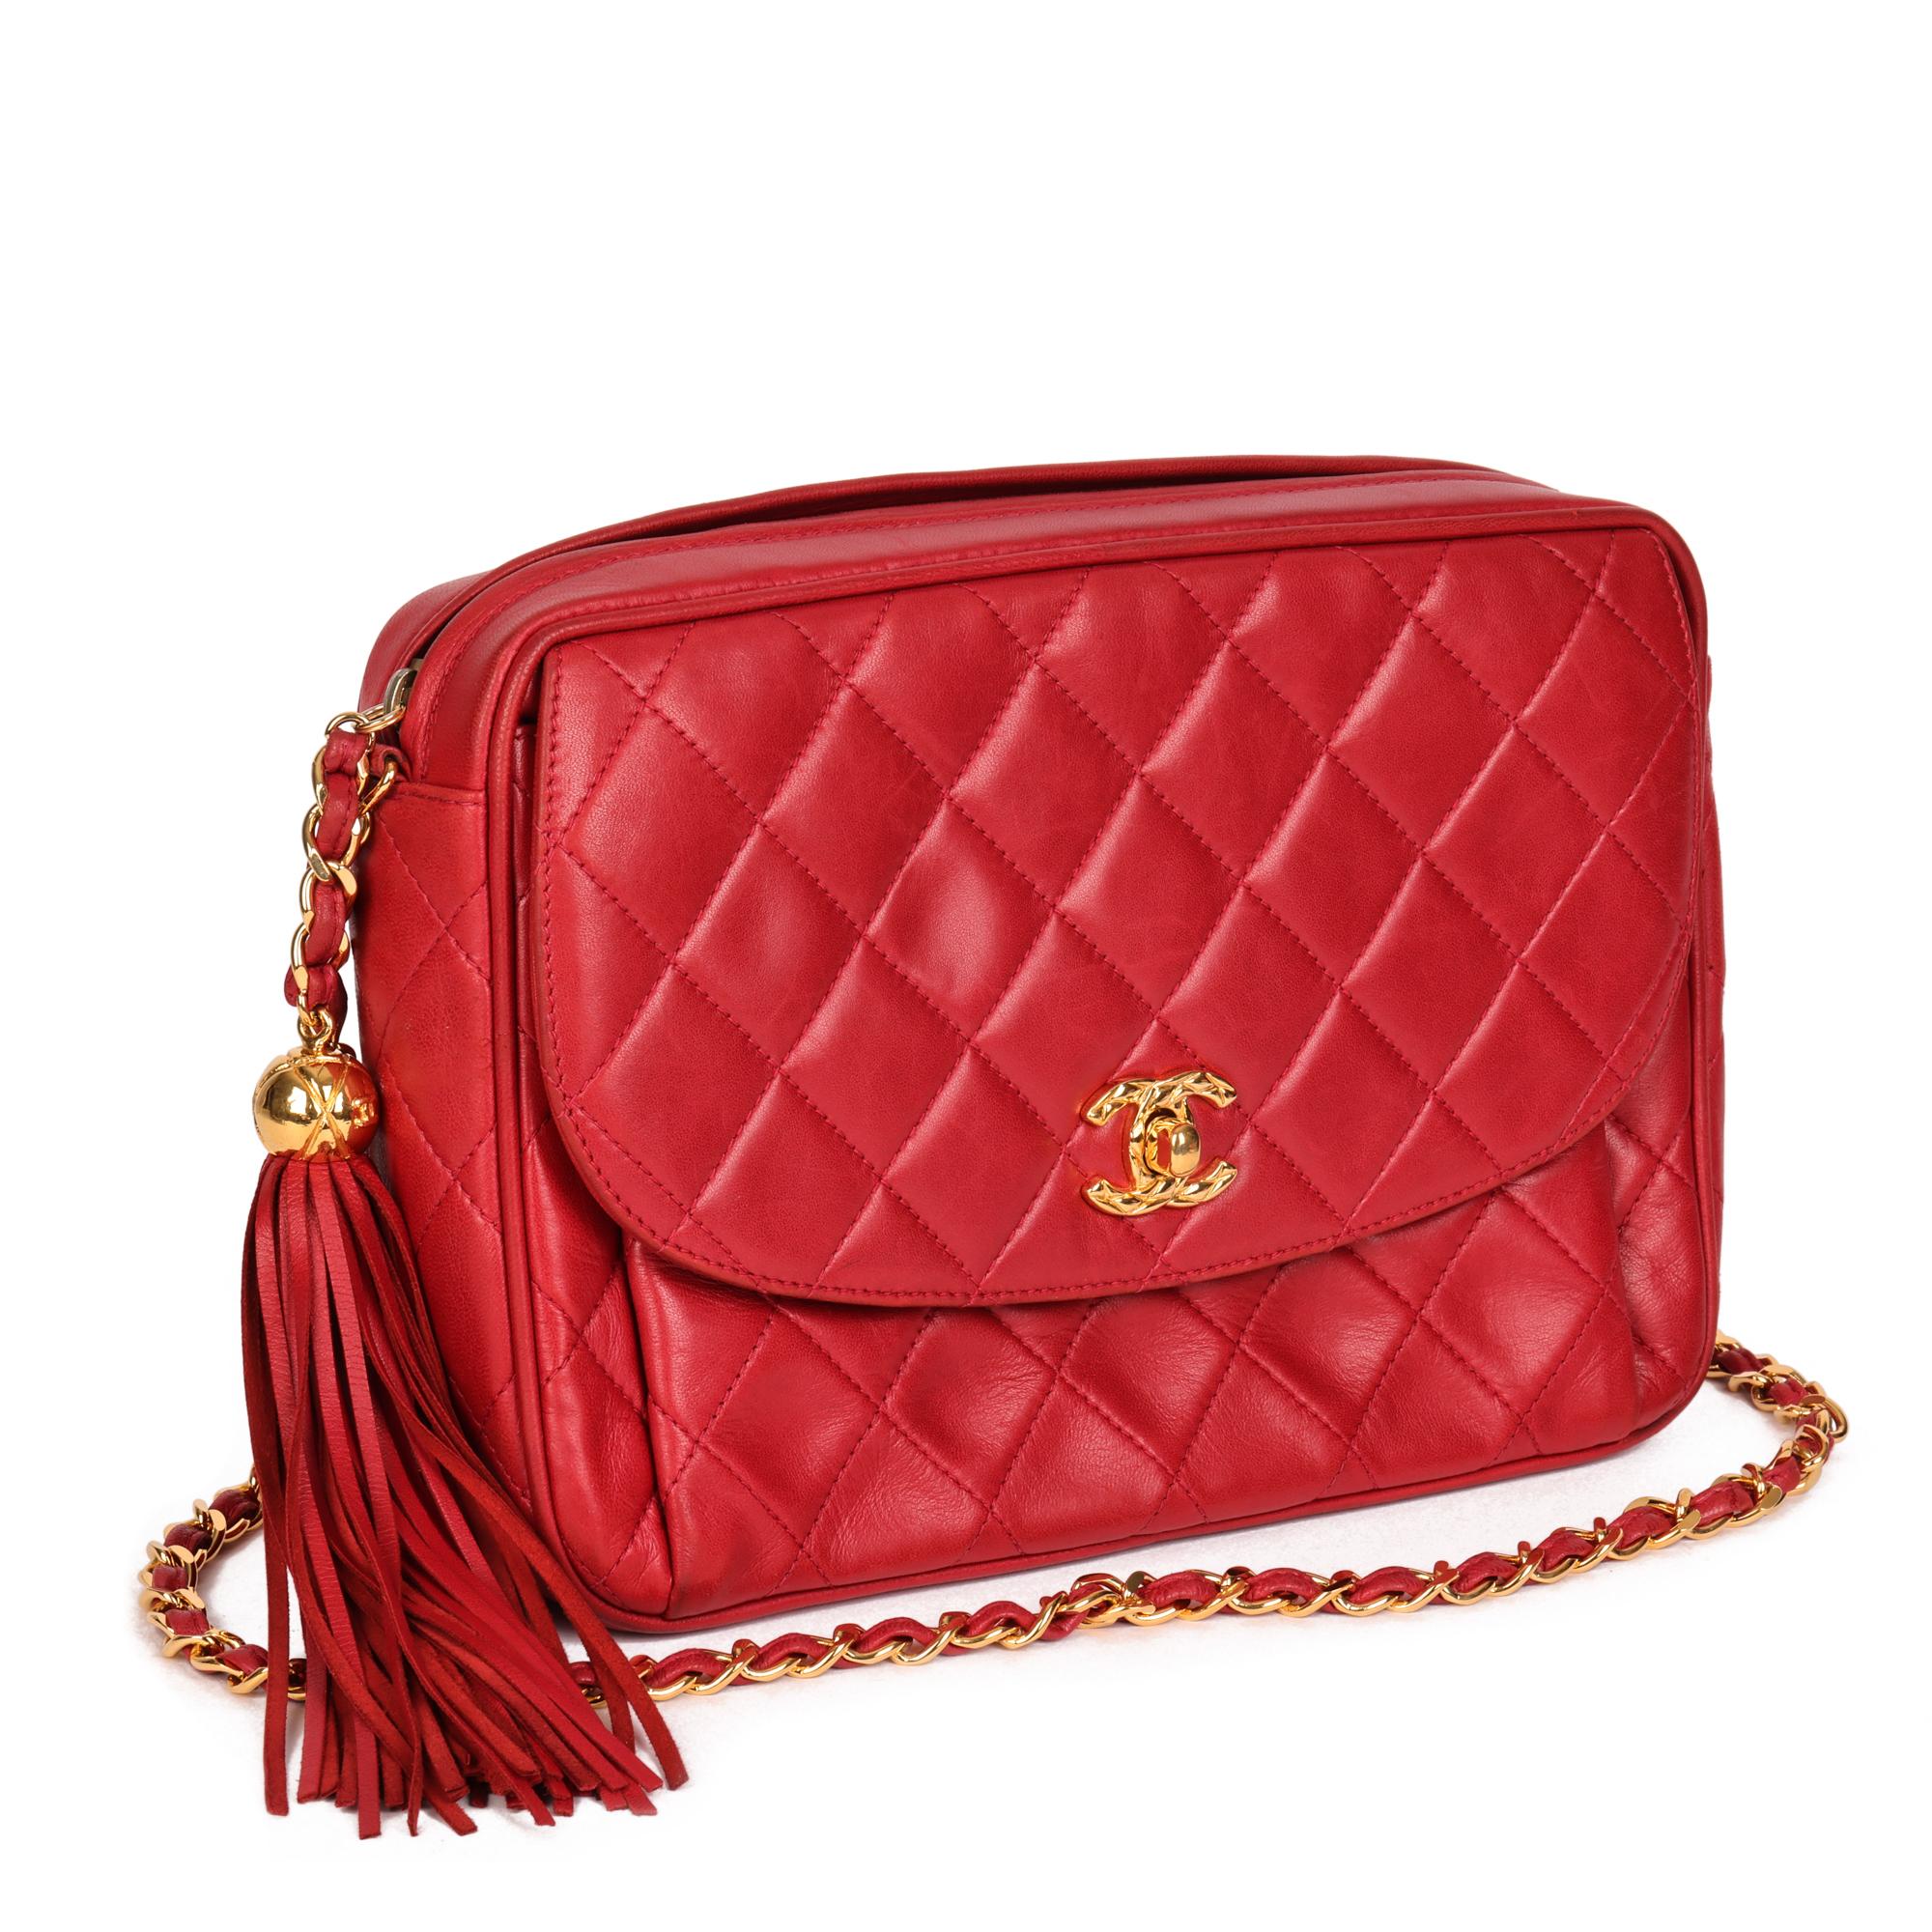 CHANEL
Red Quilted Lambskin Vintage Small Classic Fringe Camera Bag

Xupes Reference: HB4454
Serial Number: 2941533
Age (Circa): 1994
Accompanied By: Chanel Dust Bag, Authenticity Card
Authenticity Details: Authenticity Card, Serial Sticker (Made in